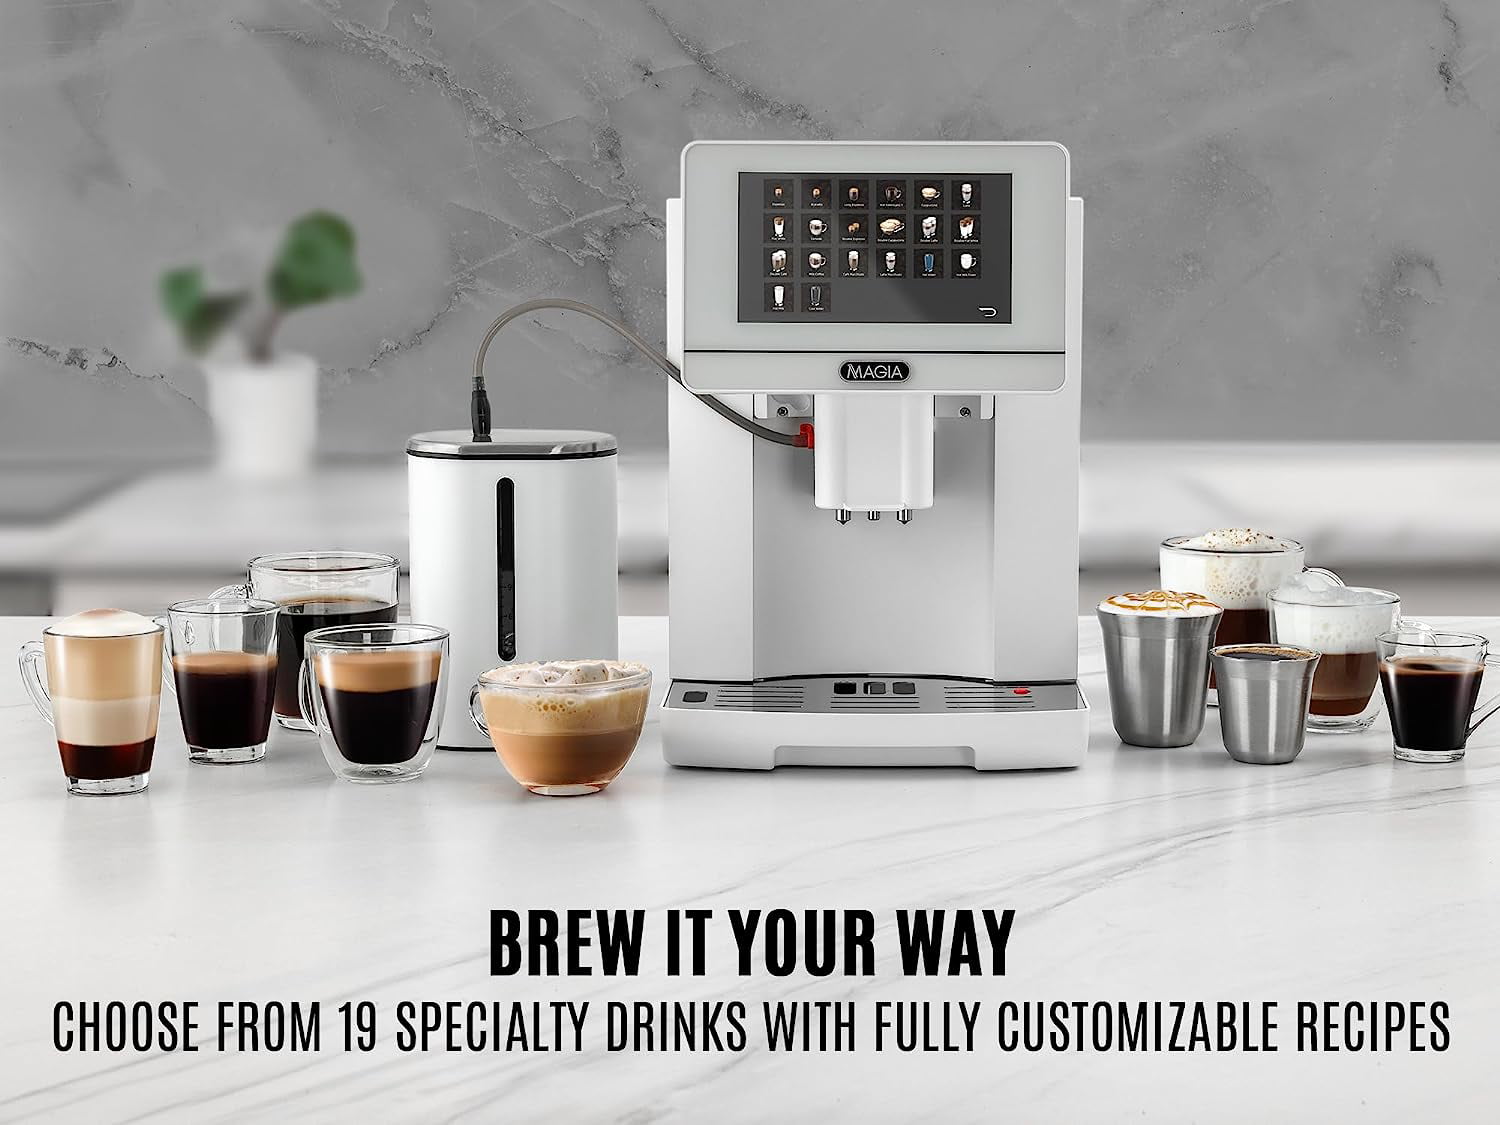 This is the Zulay Magia Super Automatic Espresso Machine. $799 on Amaz